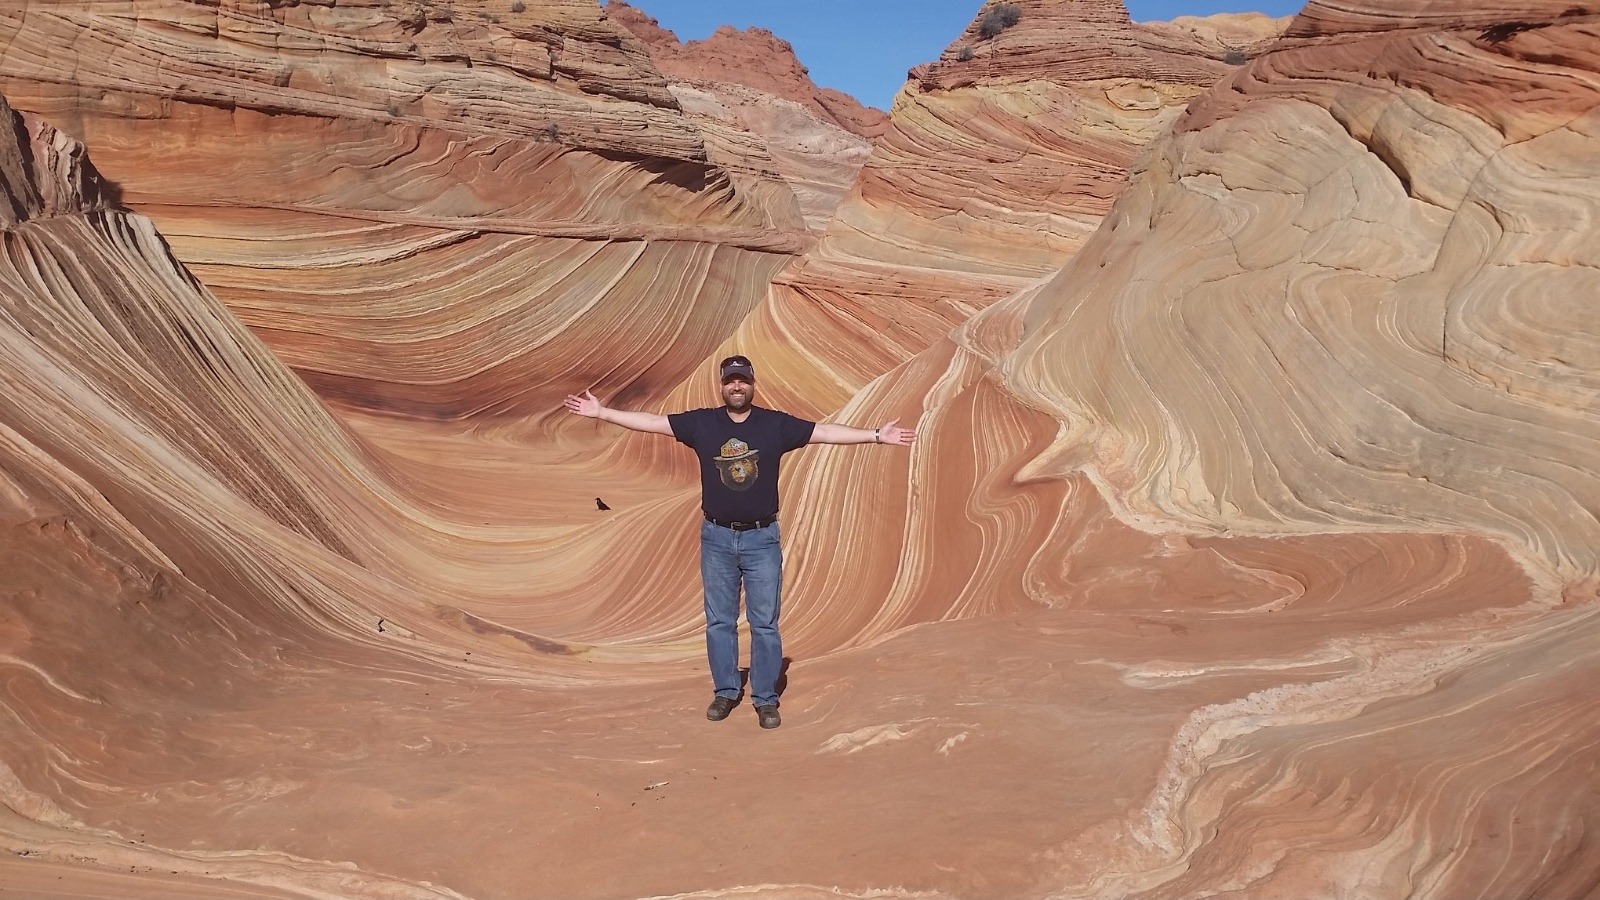 Living the dream of experiencing The Wave formation at North Coyote Buttes in the Paria Canyon-Vermillion Cliffs Wilderness, Utah. Photo courtesy Todd Johnson